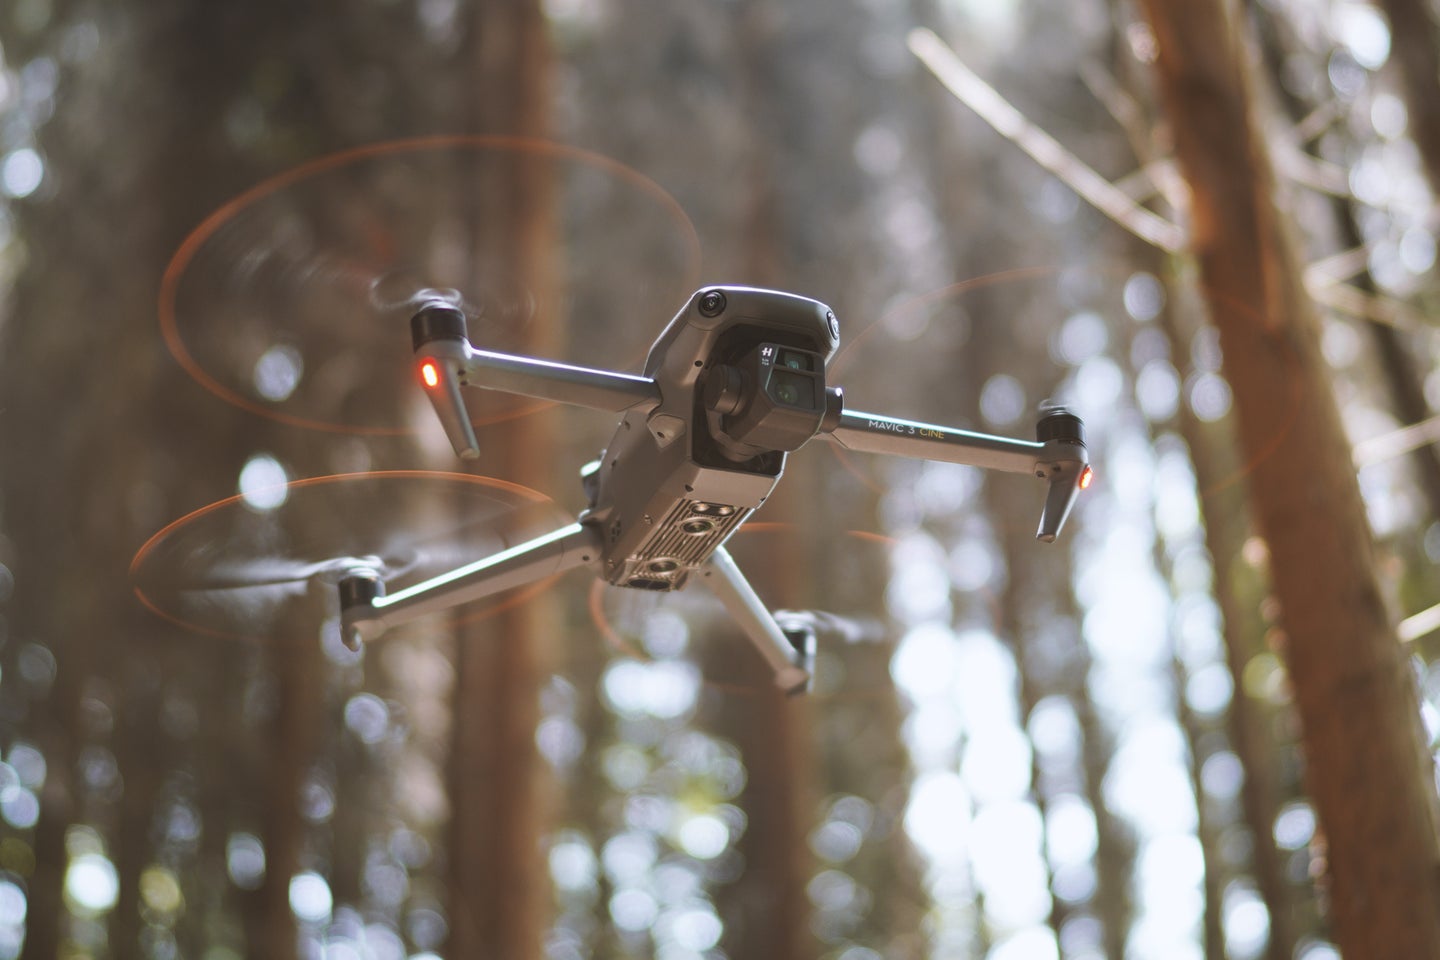 drone flying through the forest